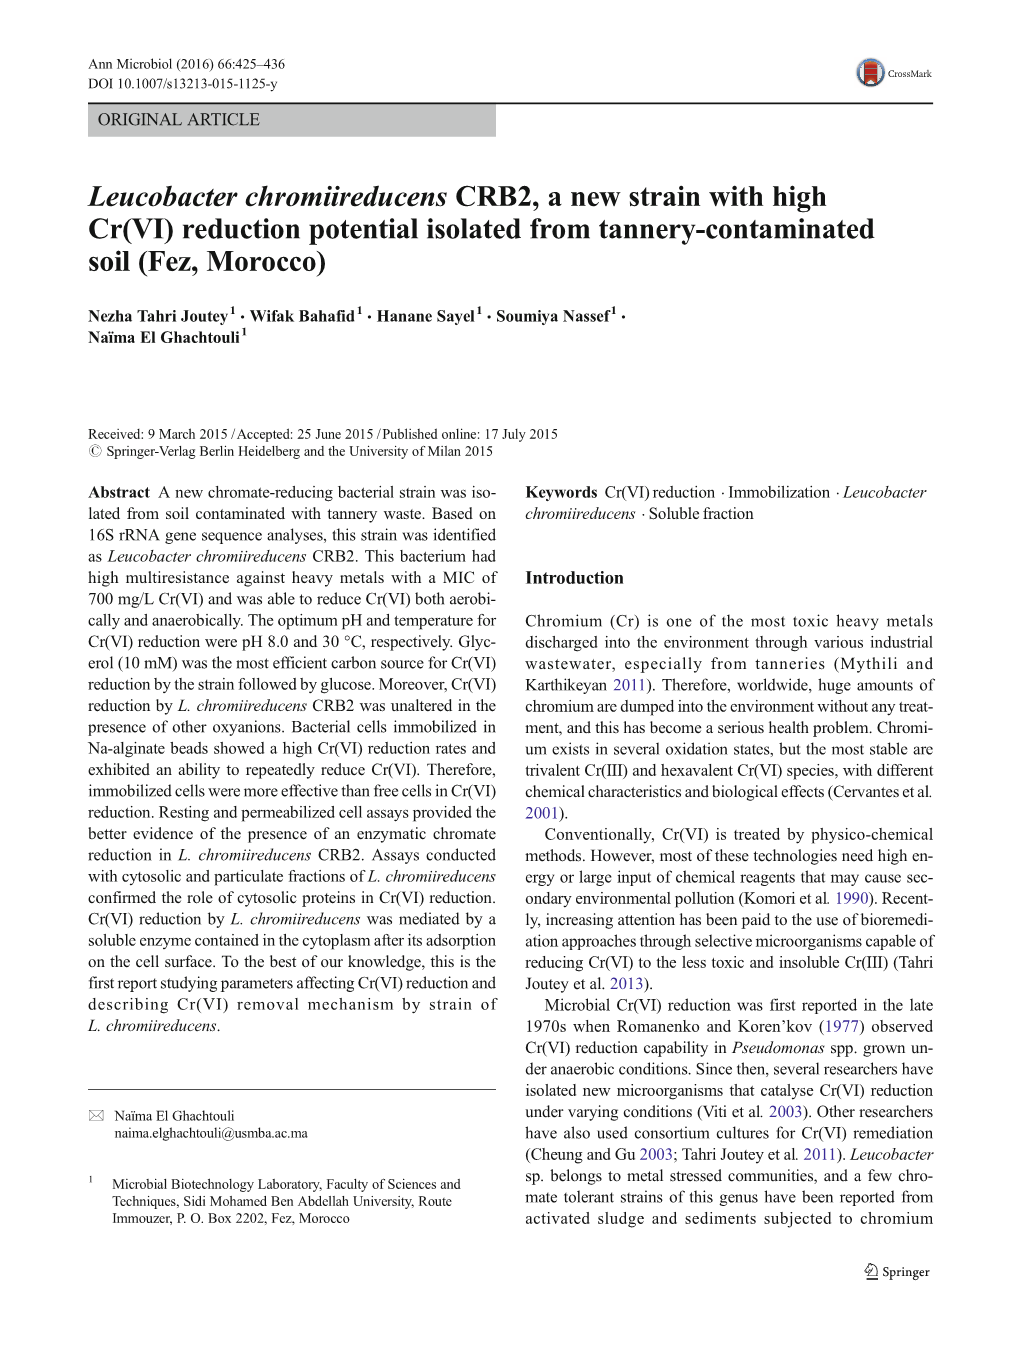 Leucobacter Chromiireducens CRB2, a New Strain with High Cr(VI) Reduction Potential Isolated from Tannery-Contaminated Soil (Fez, Morocco)